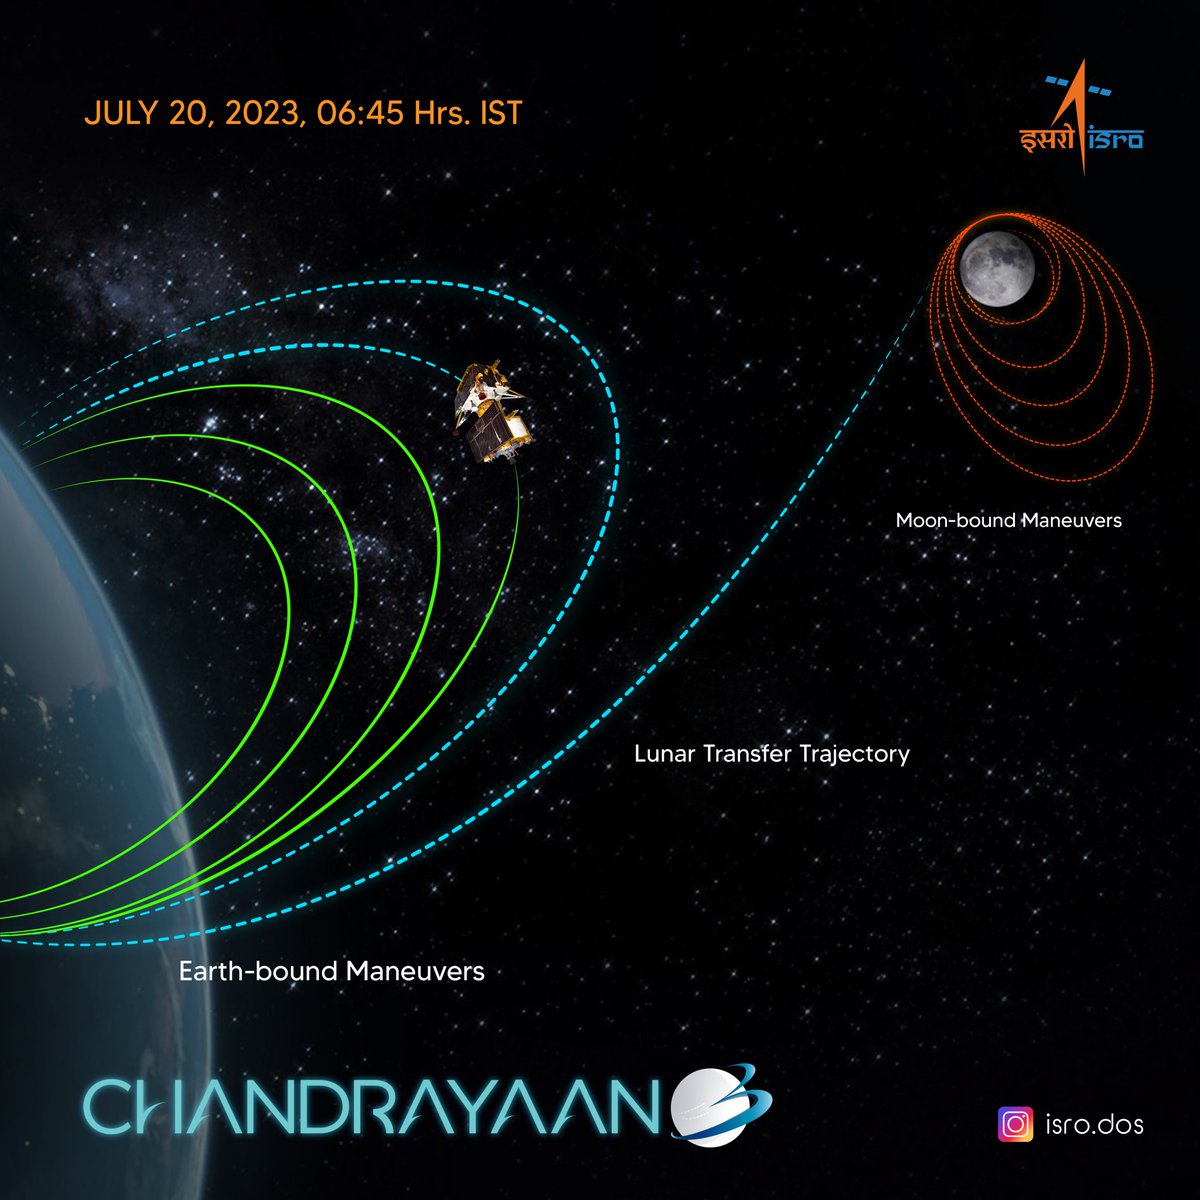 Chandrayaan-3 Mission:
🇮🇳 India celebrates #InternationalMoonDay 2023 by propelling Chandrayaan-3 🛰️ a step closer to the Moon 🌖

The fourth orbit-raising maneuver (Earth-bound perigee firing) is performed successfully from ISTRAC/ISRO, Bengaluru.

The next firing is planned for…